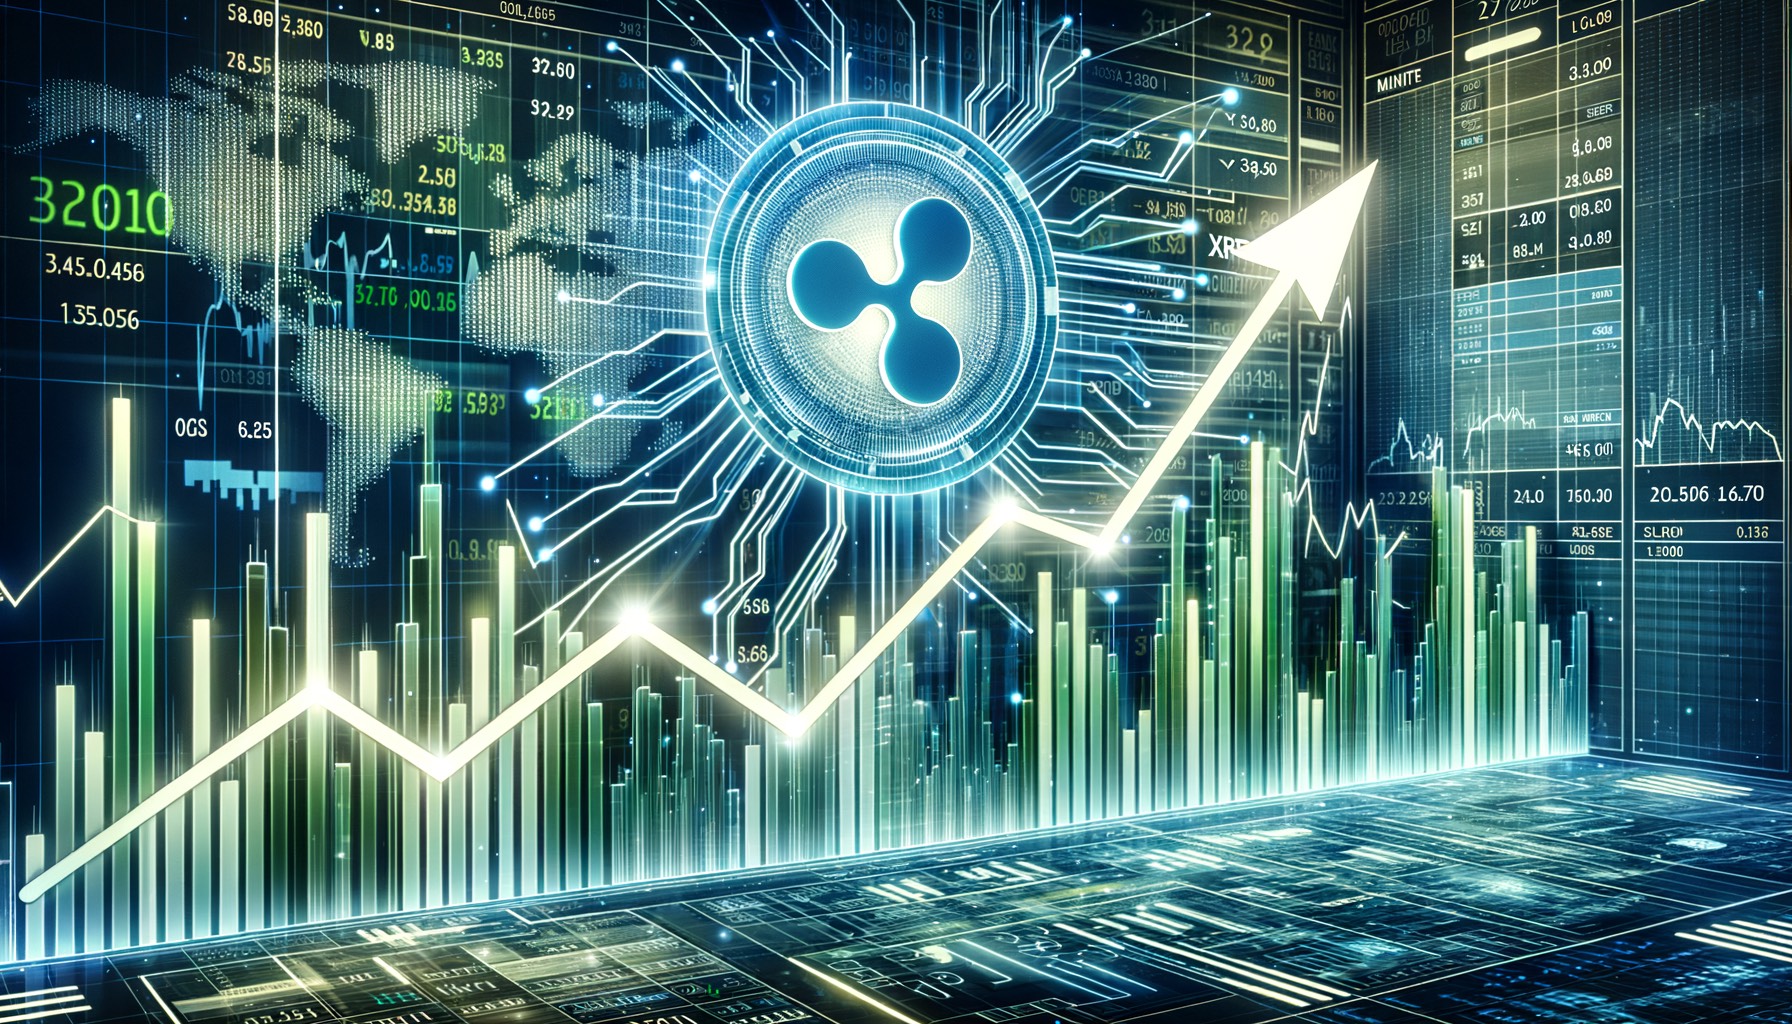 Ripple: Analyst Predicts XRP To Surge 250%, Hit $1.88 Target